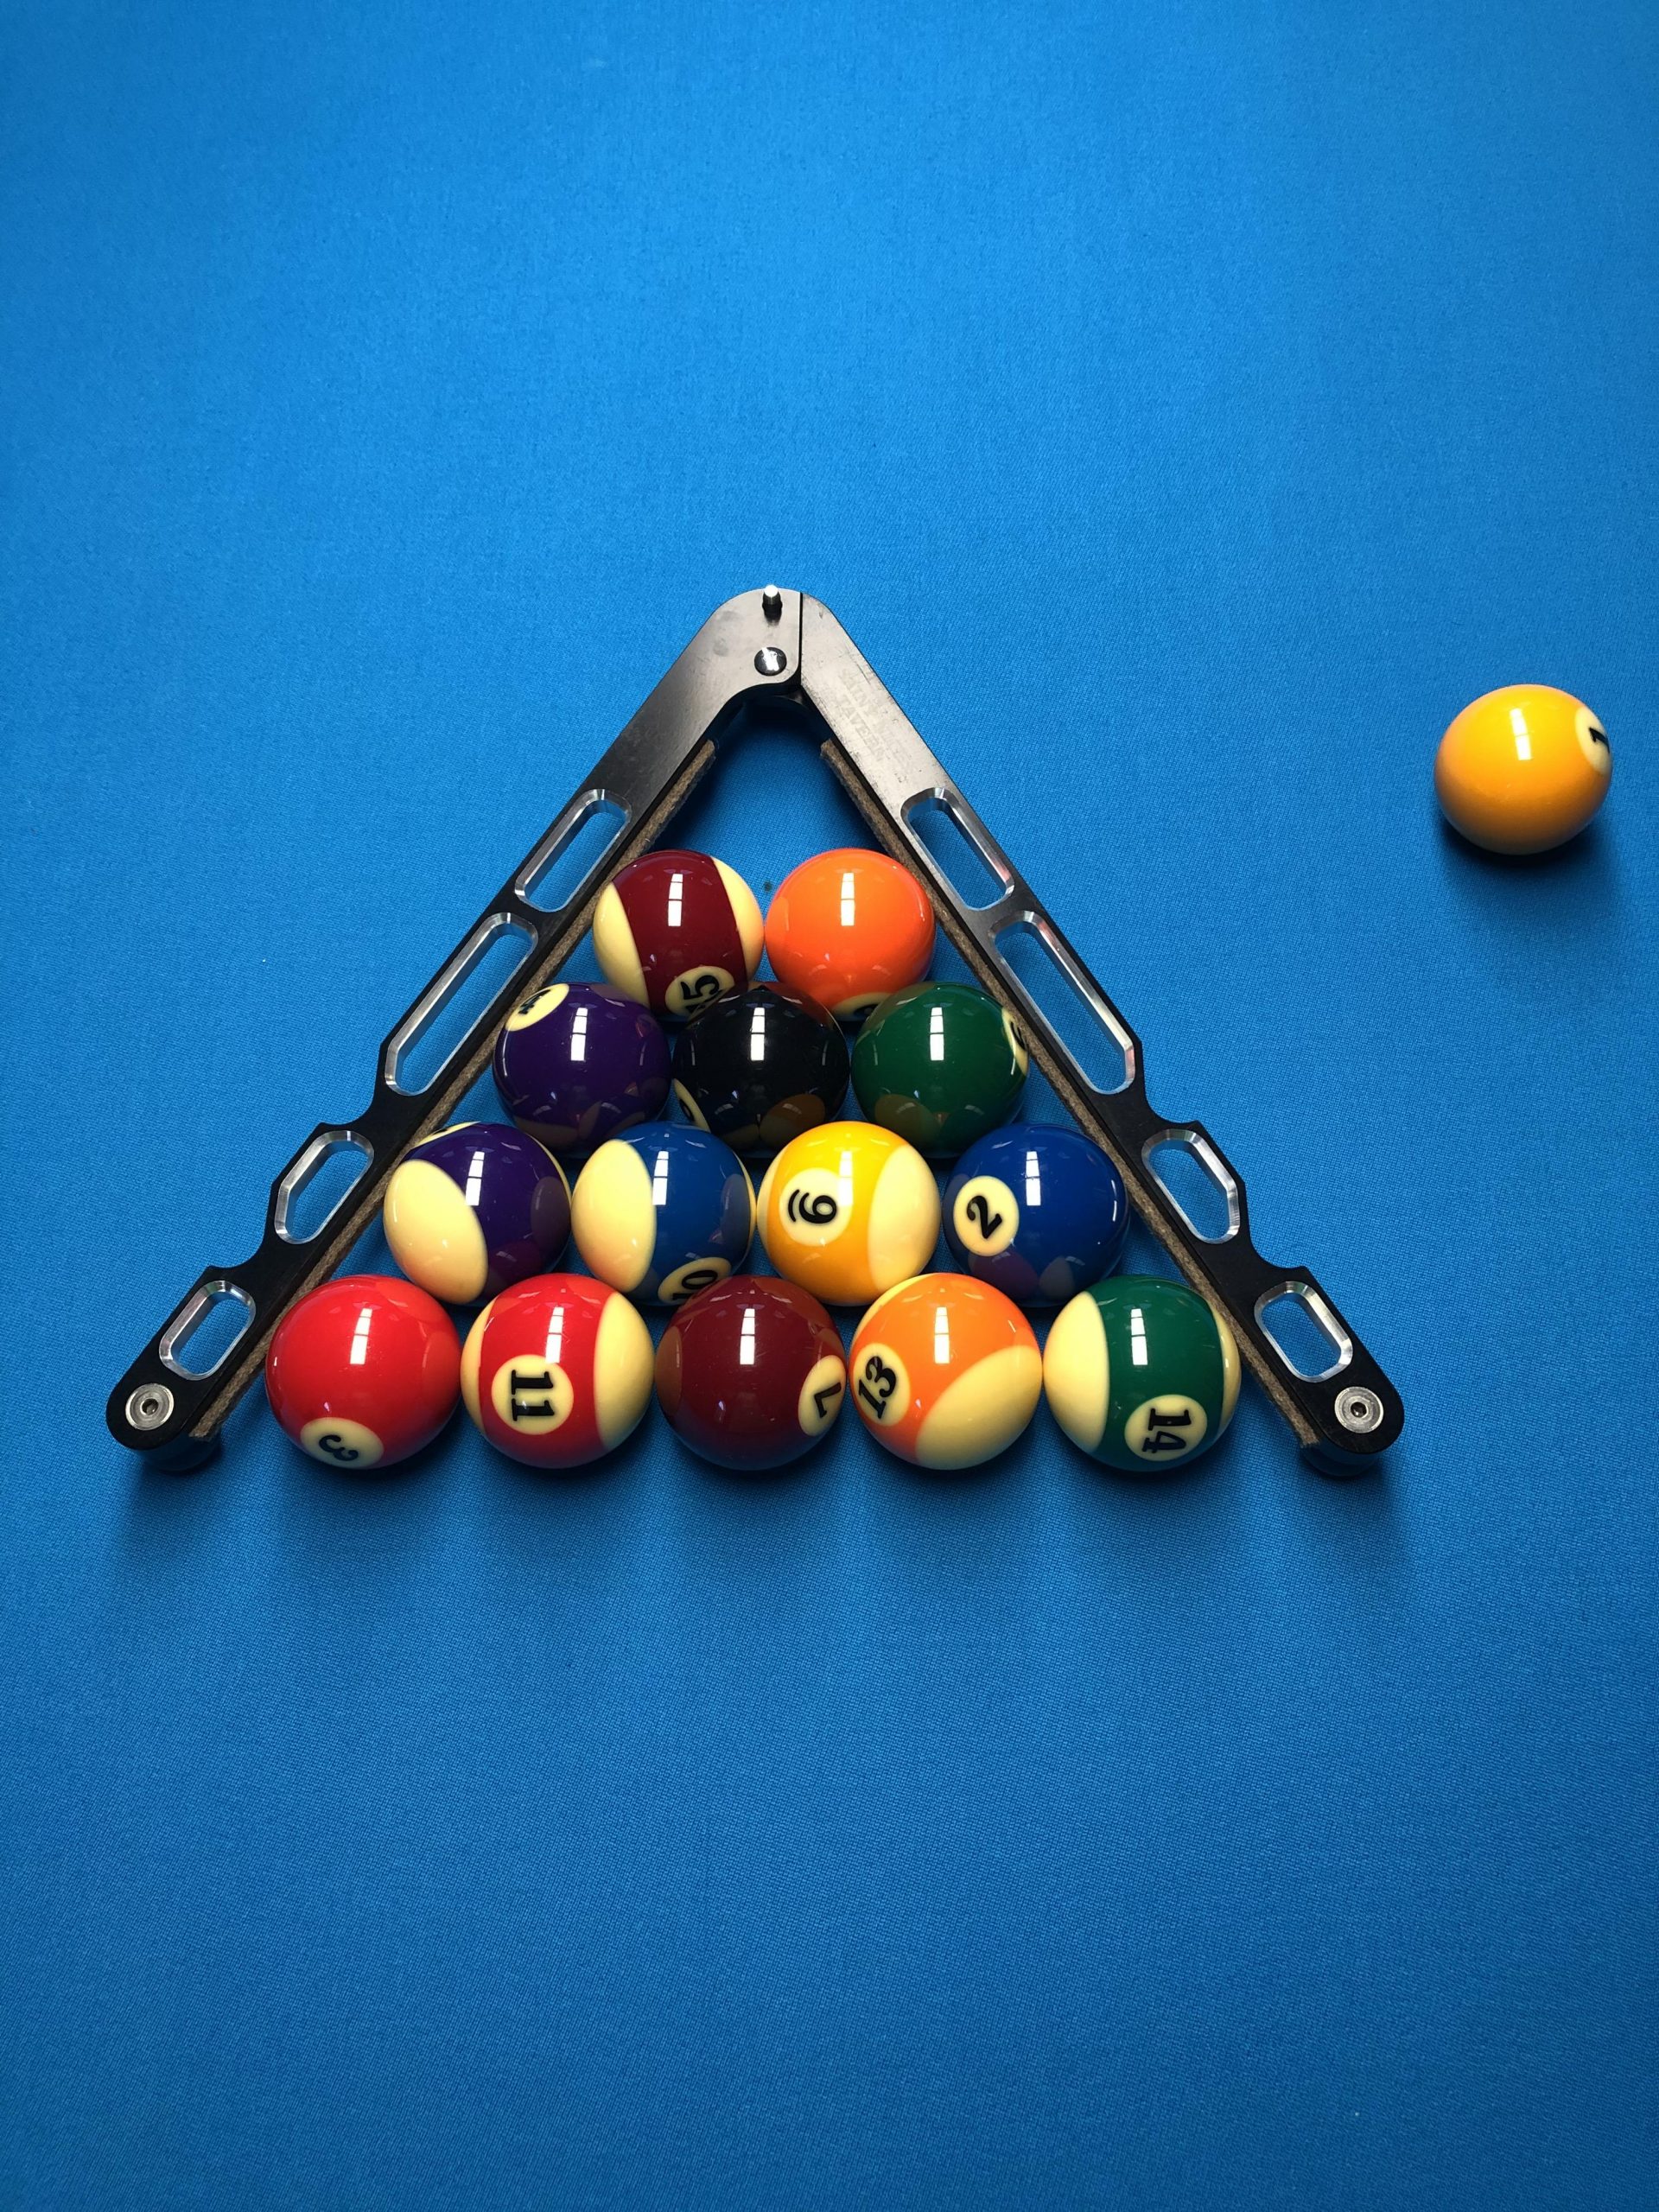 The Official 8 Ball Rack Setup: The Proper Way Explained!